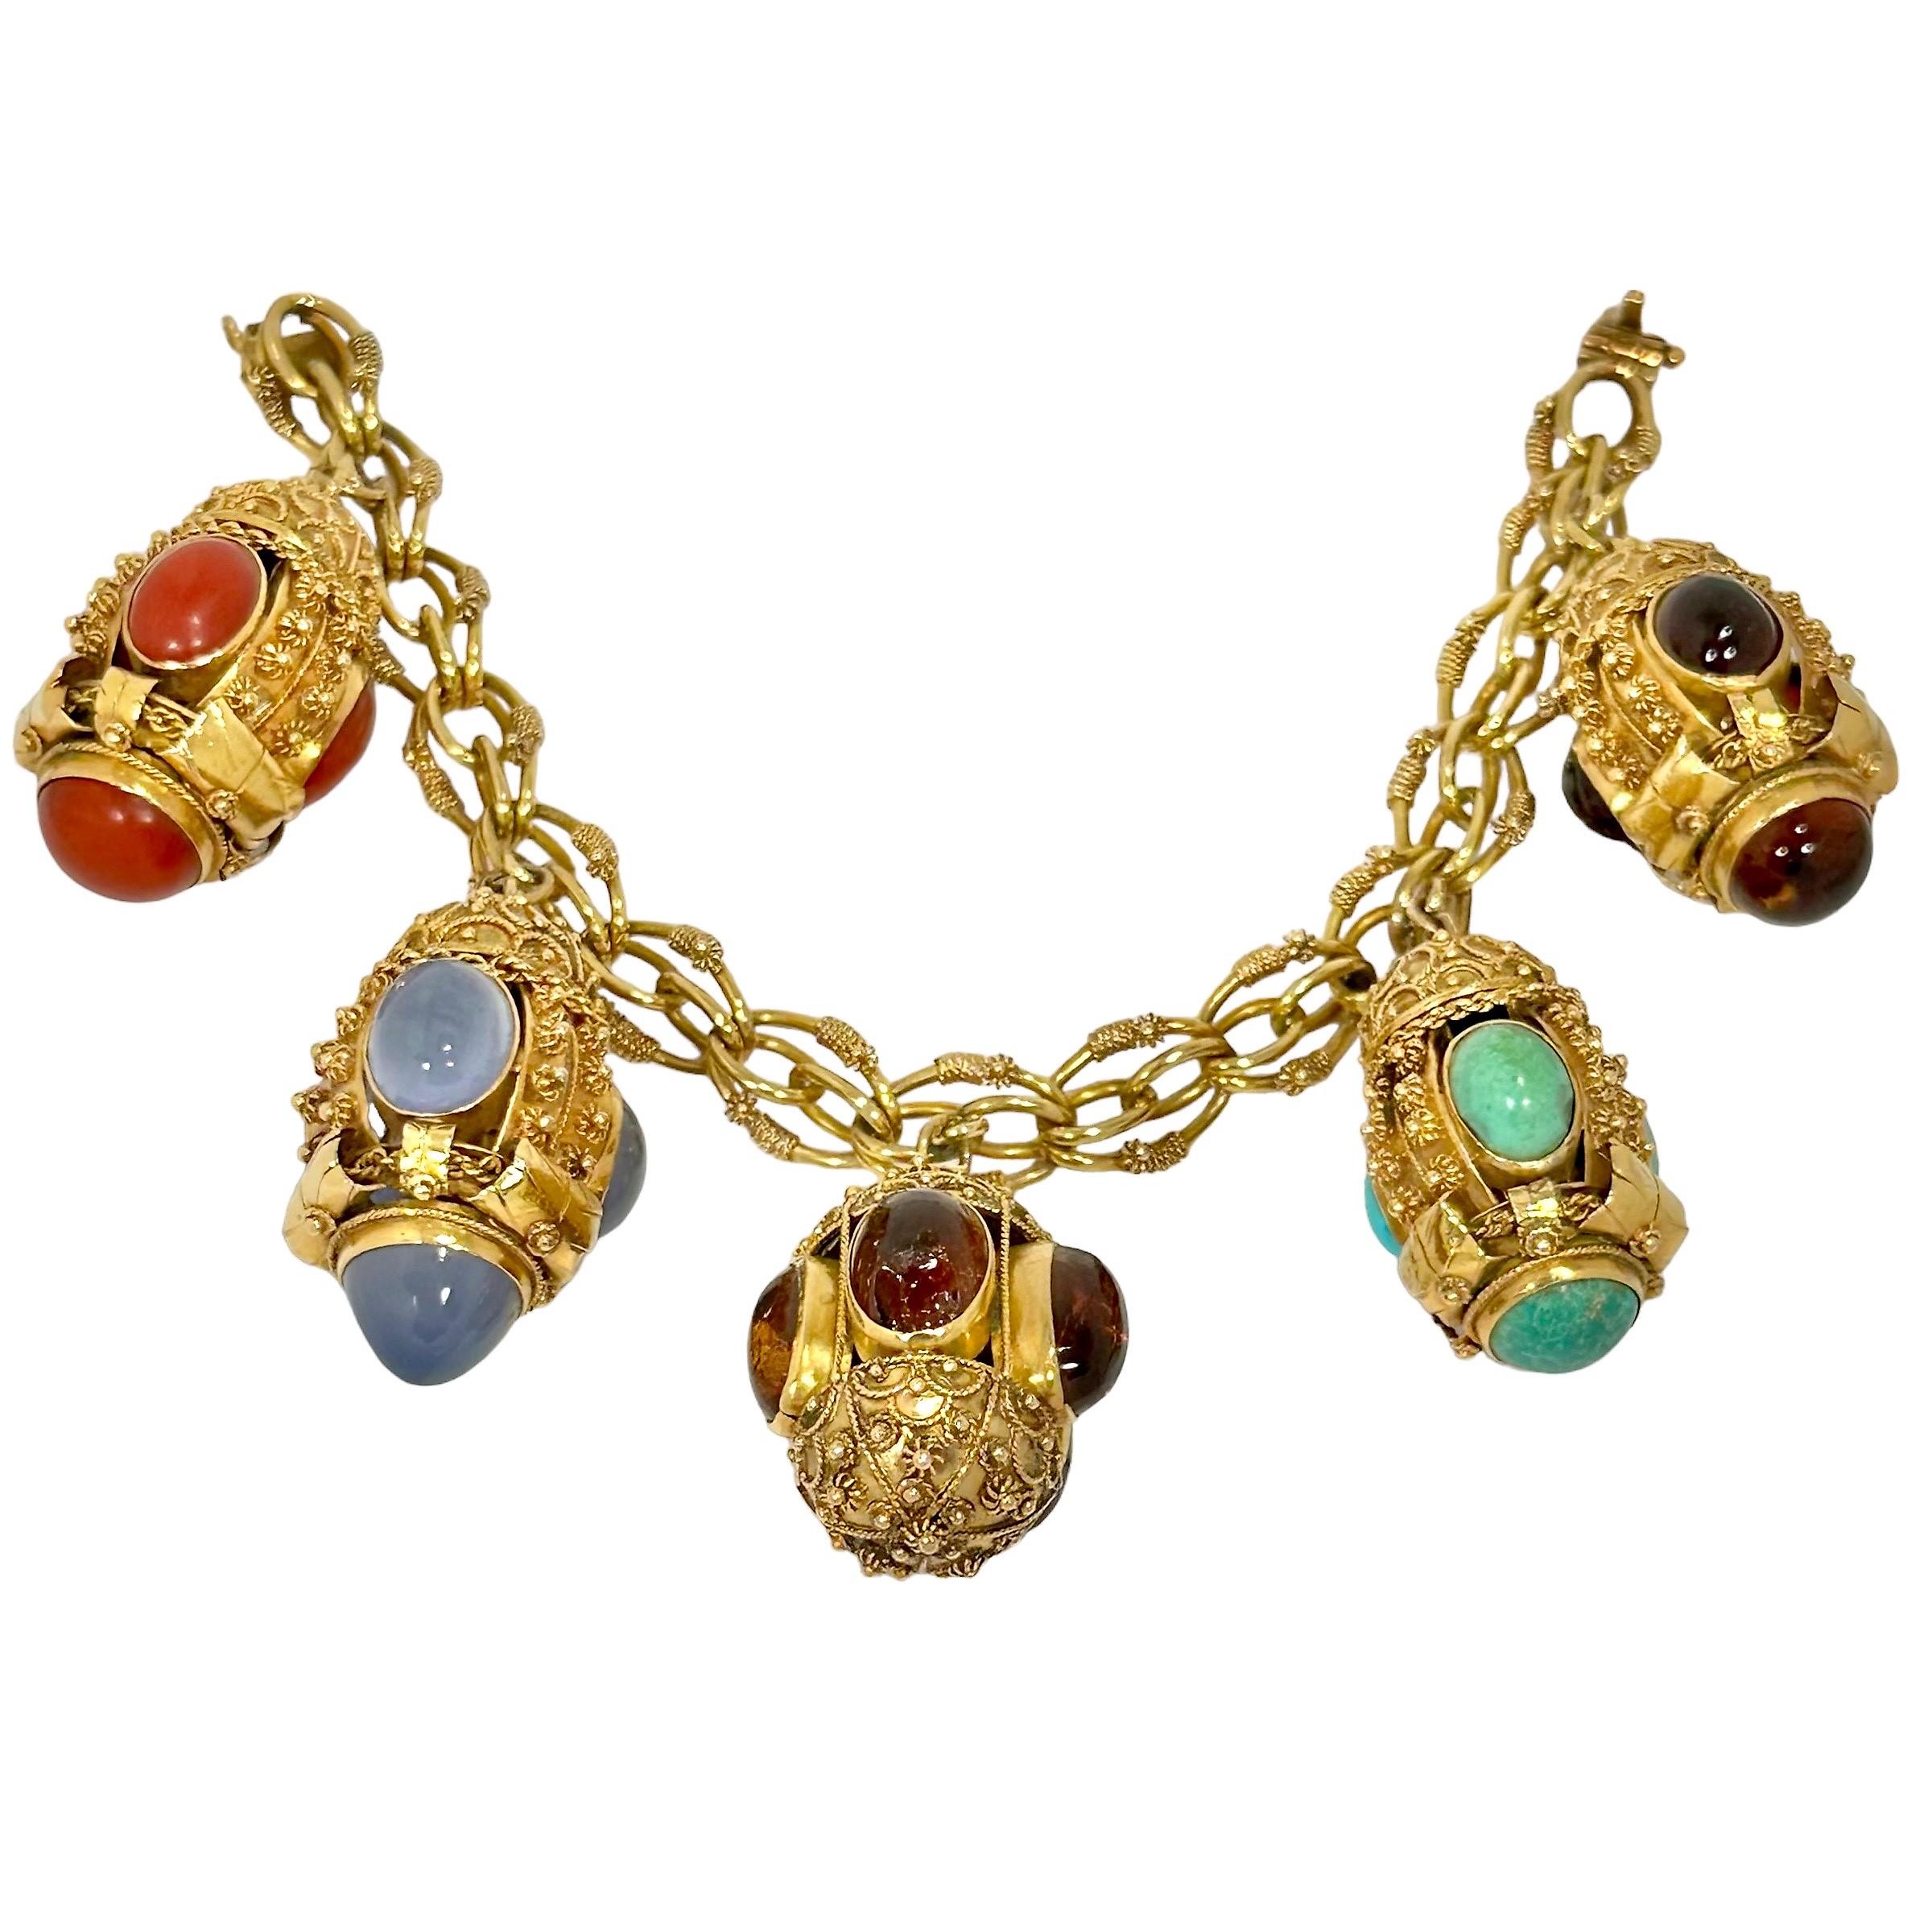 This fanciful vintage creation is uniquely the product of master goldsmiths working in Italy during the Mid-20th Century. Mounted on the very intricate bracelet of the same period are five very detailed and handmade Etruscan Revival charms, each set